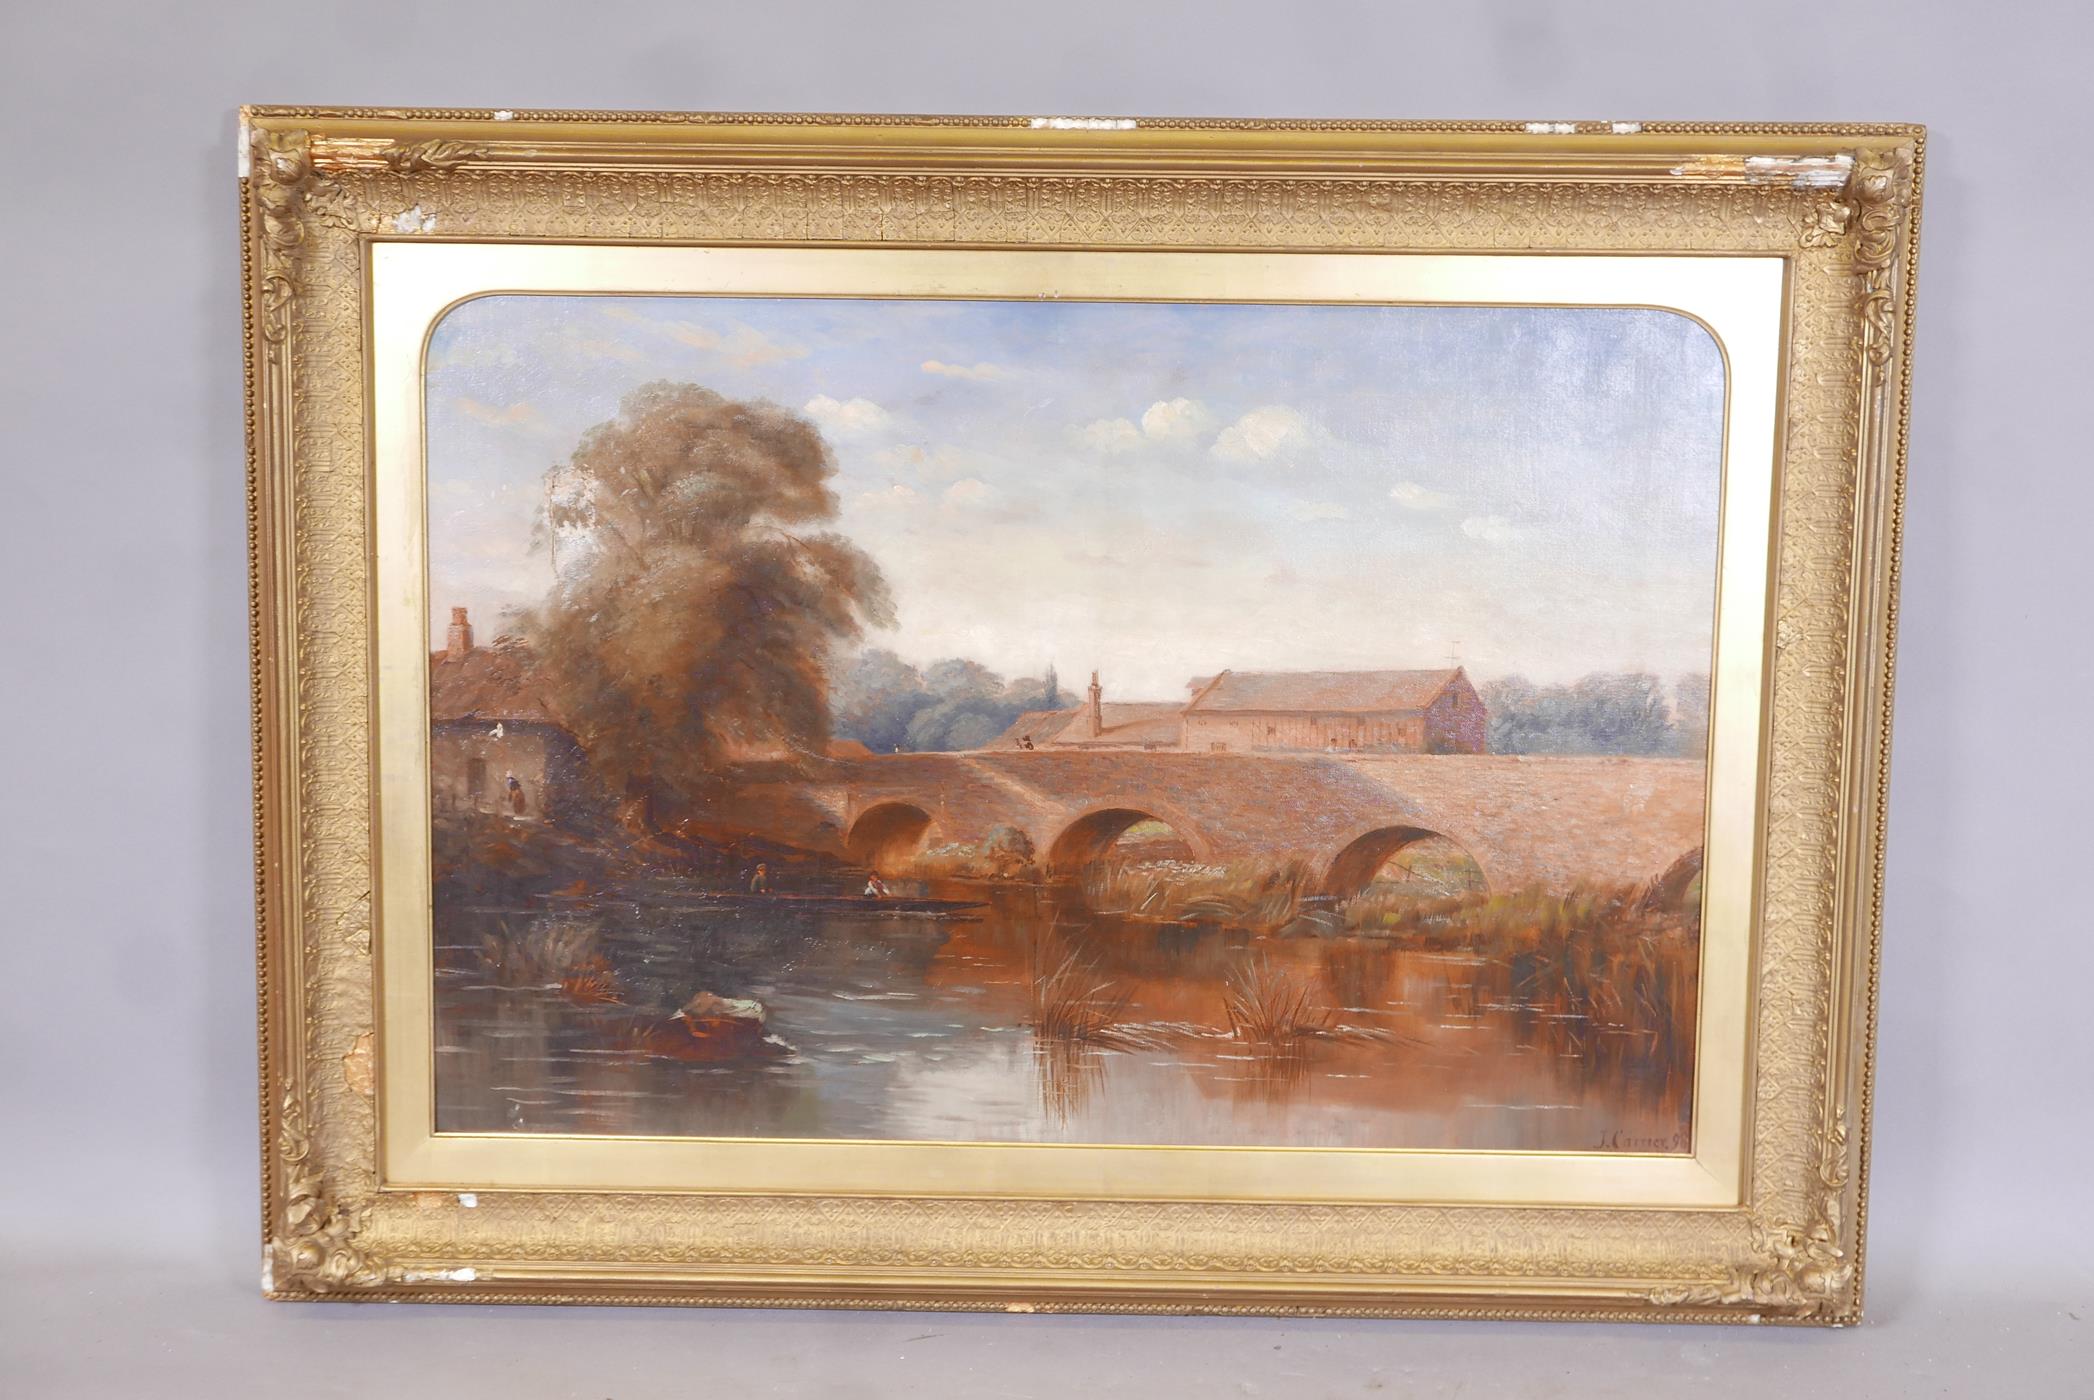 J. Carrier, C19th oil on canvas, bridge over a river, dated (18)98, A/F, 36" x 24" - Image 2 of 7